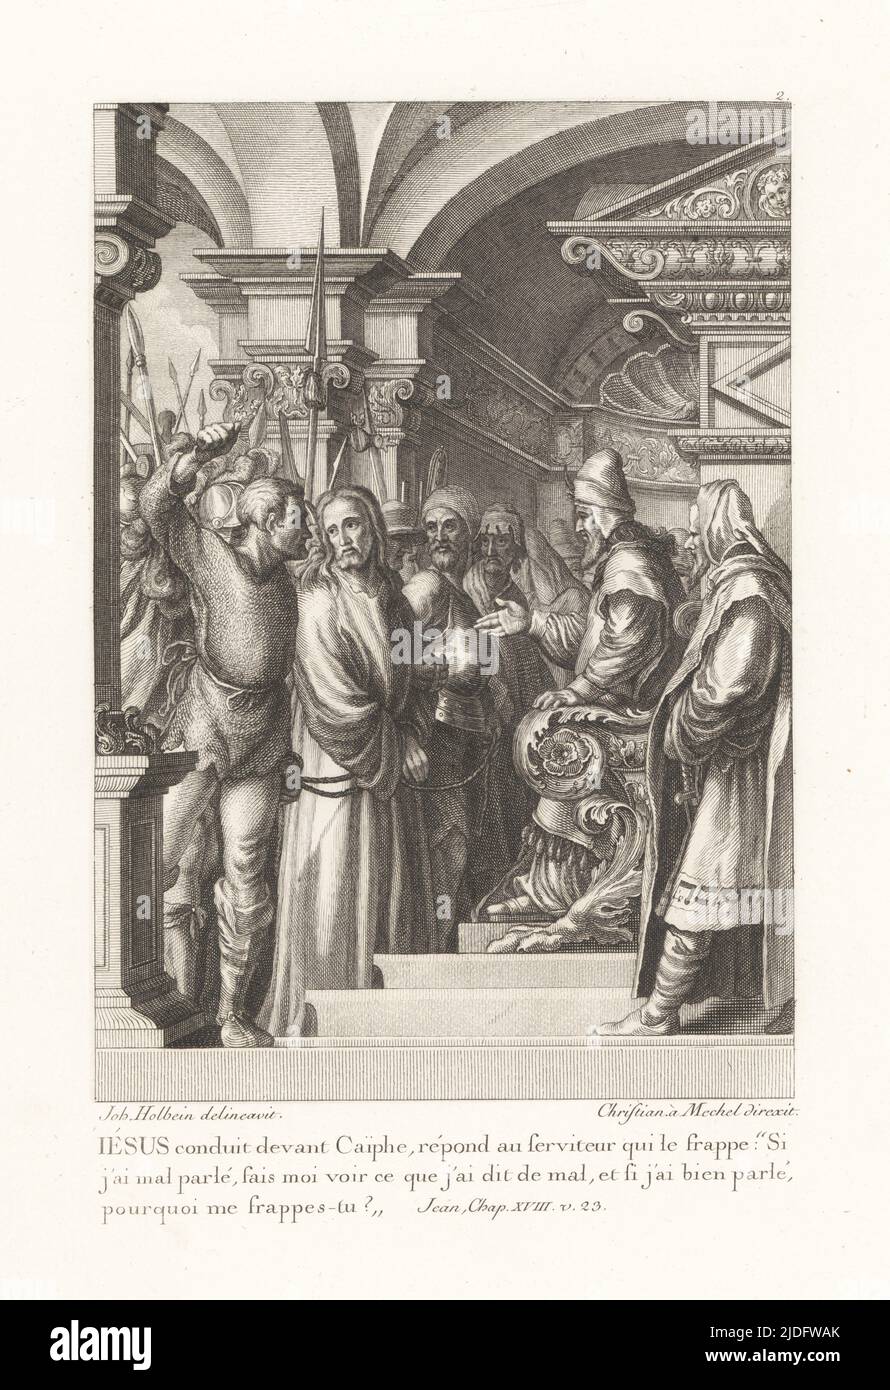 Jesus Christ brought before Jewish high priest Caiaphas. Jesus conduit devant Caiphe. John XVIII v 23. From Le Passion de Notre Seigneur, The Passion of our Lord. Copperplate engraving by Christian Mechel after a portrait by Hans Holbein in Christian von Mechel's Oeuvre de Jean Holbein, Chez Guillaume Haas, Basel, 1784. Stock Photo